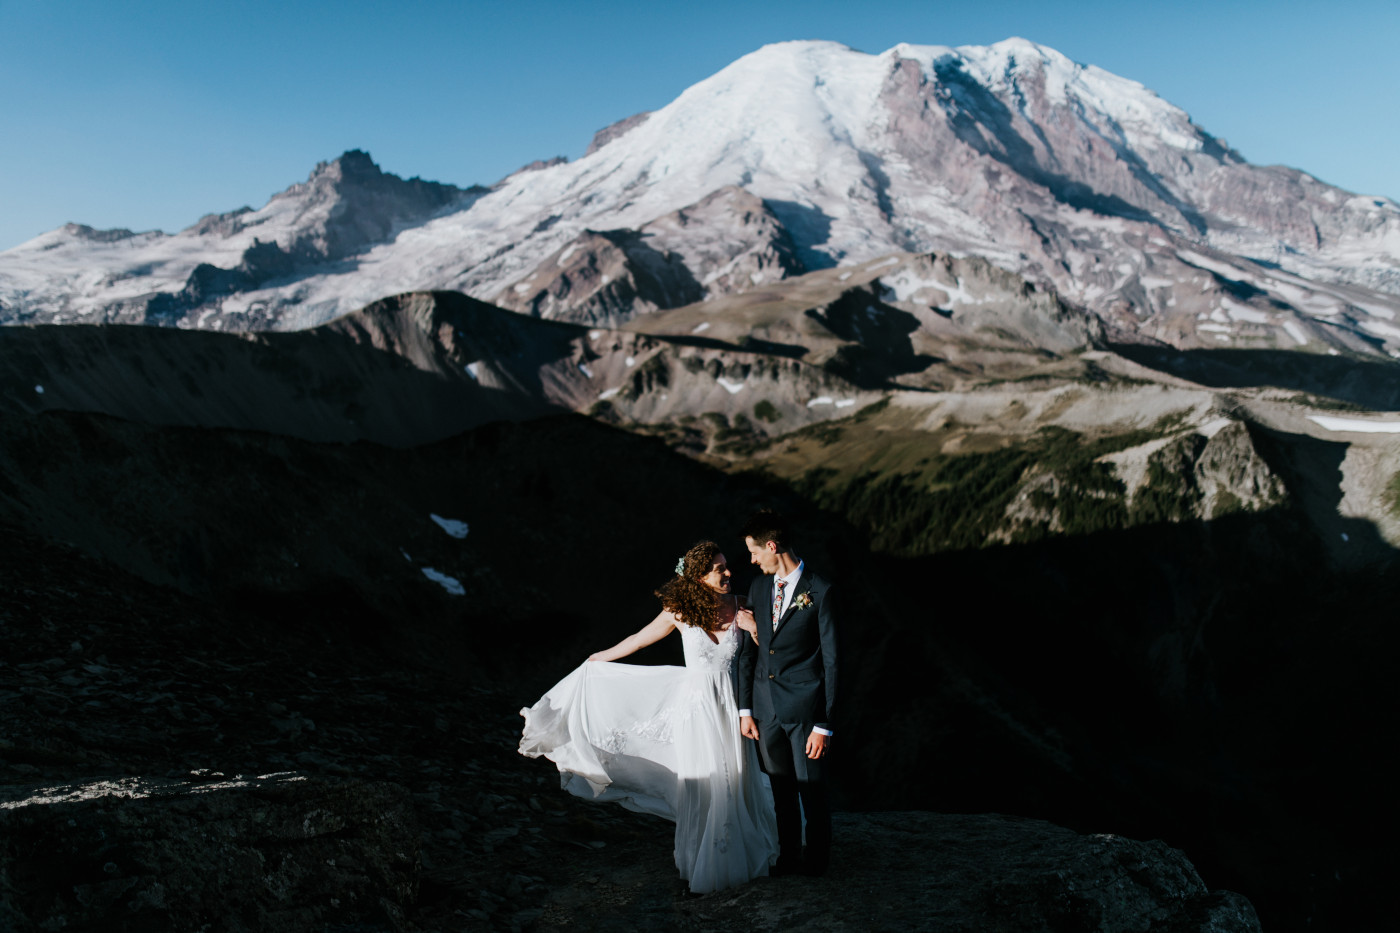 Tasha and Chad stand together. Elopement photography at Mount Rainier by Sienna Plus Josh.